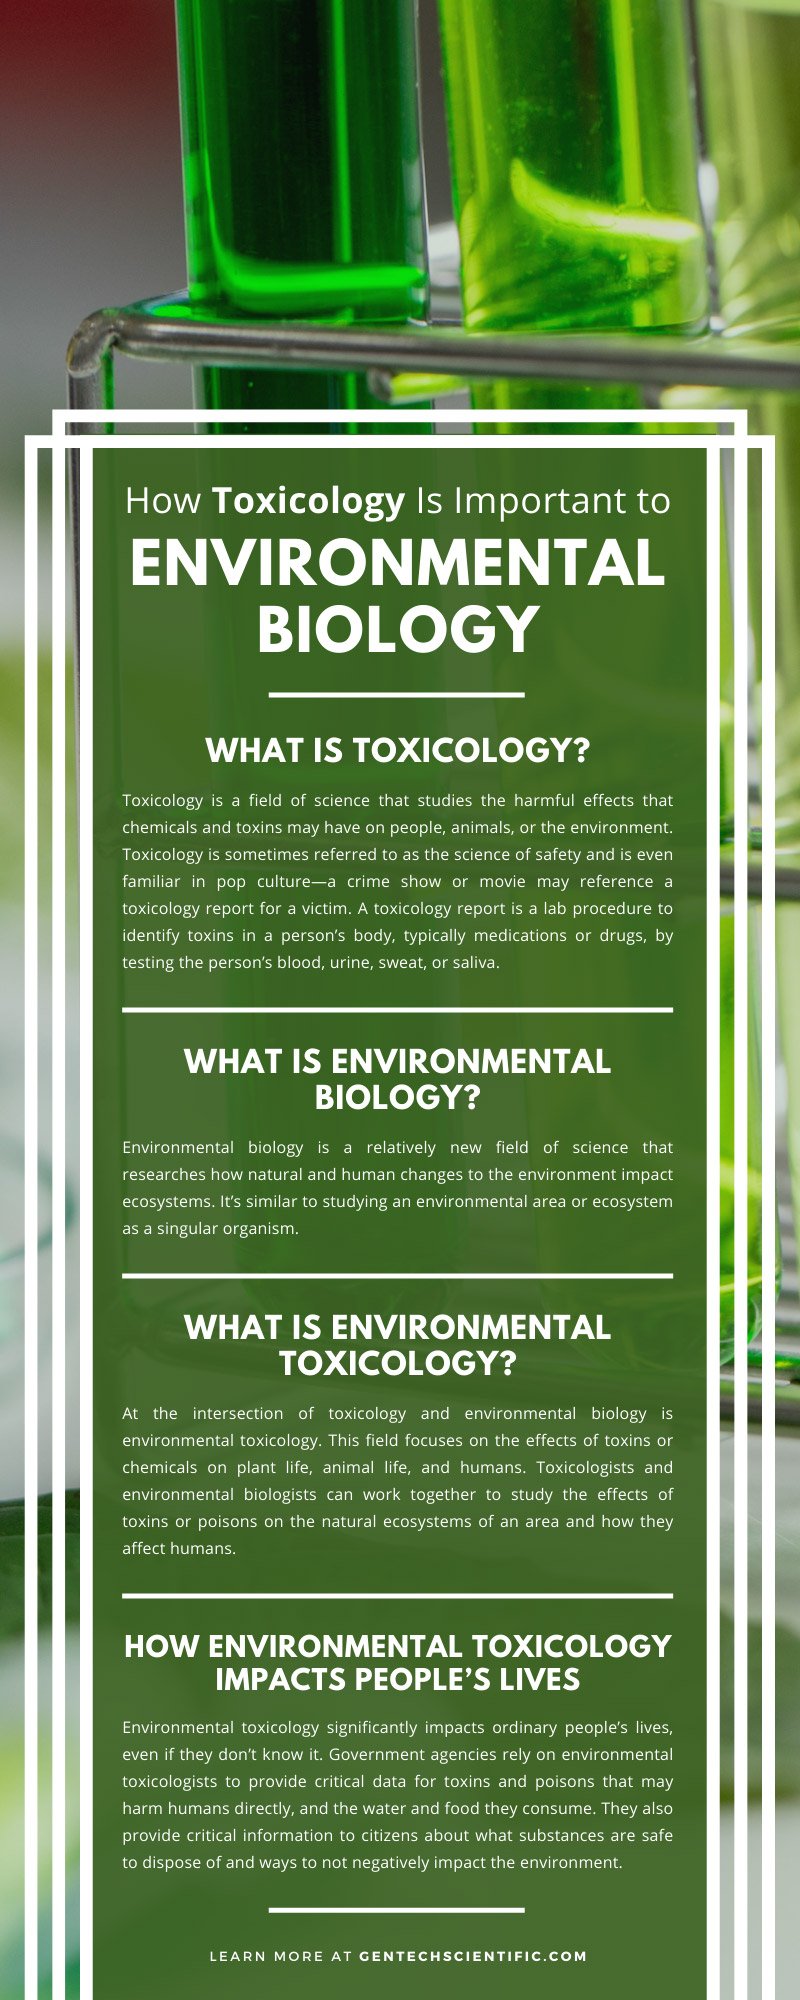 How Toxicology Is Important to Environmental Biology